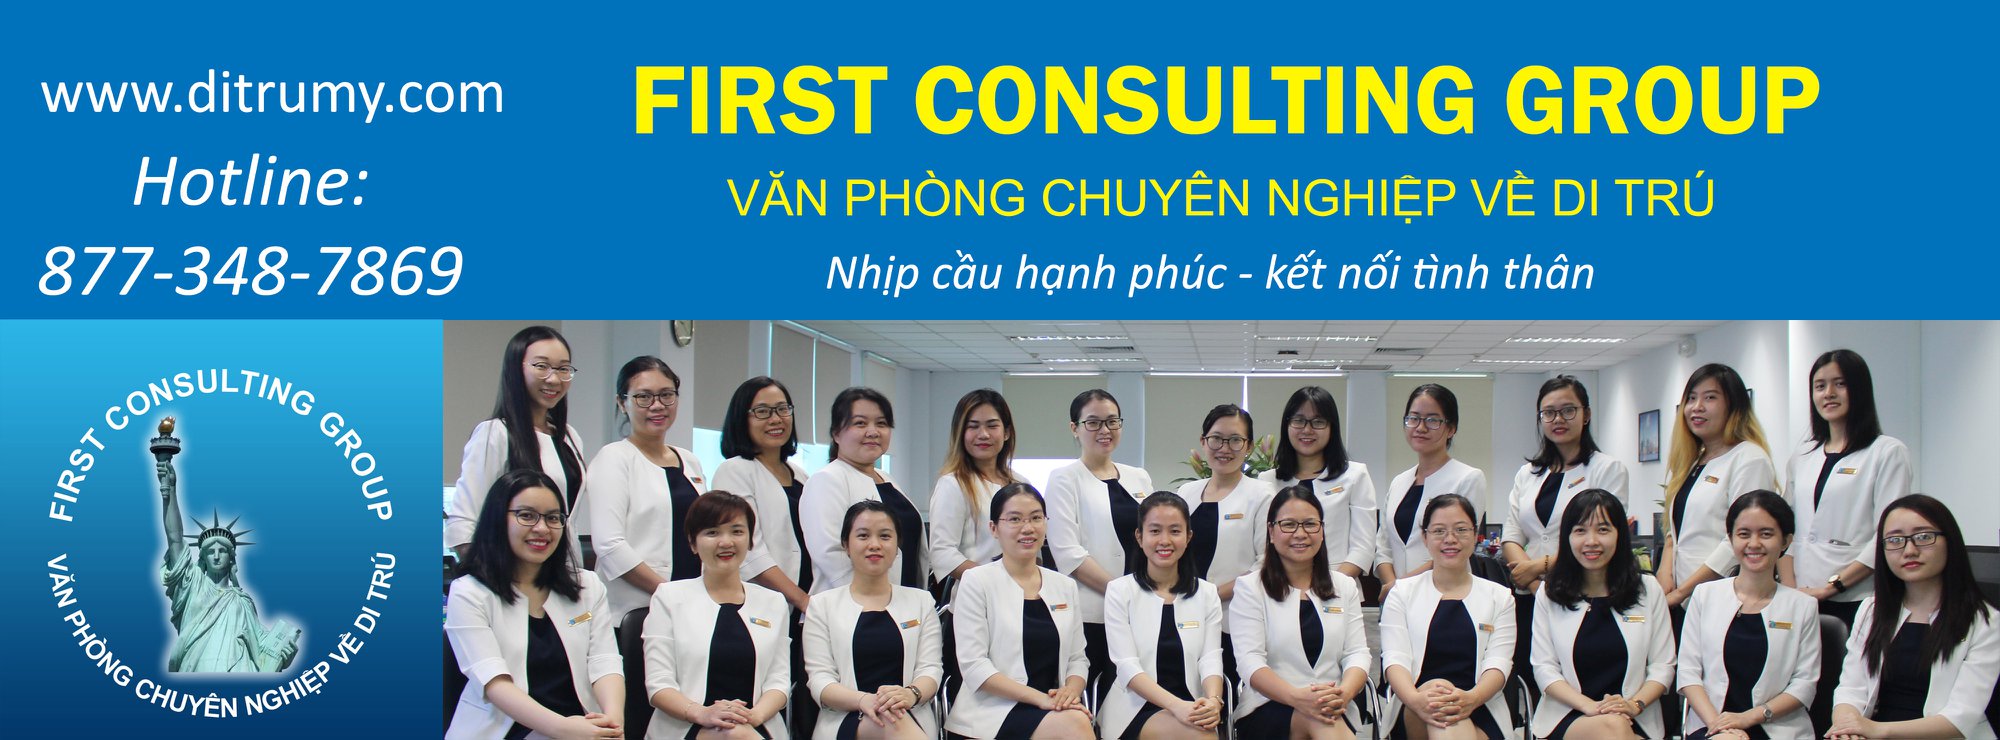 First Consulting Group ảnh 1